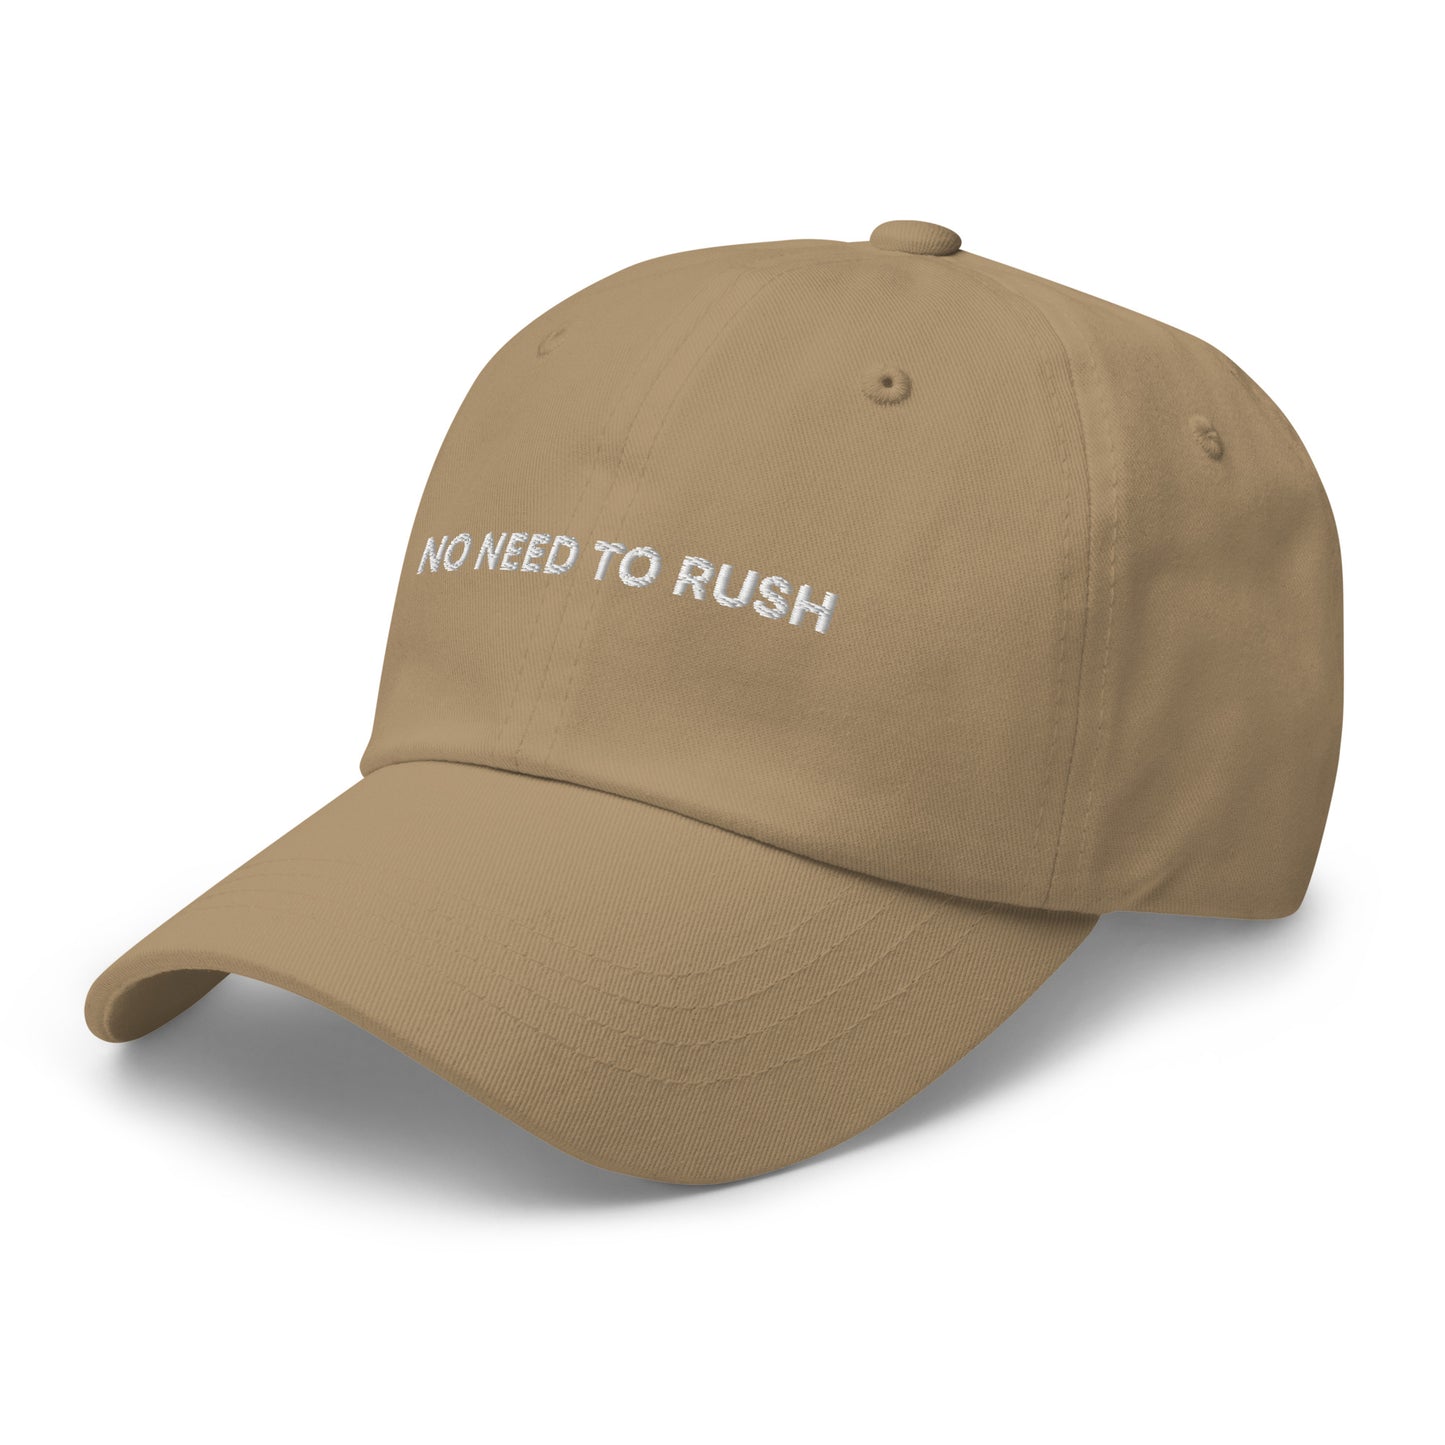 NO NEED TO RUSH (NAVY BLUE HAT)